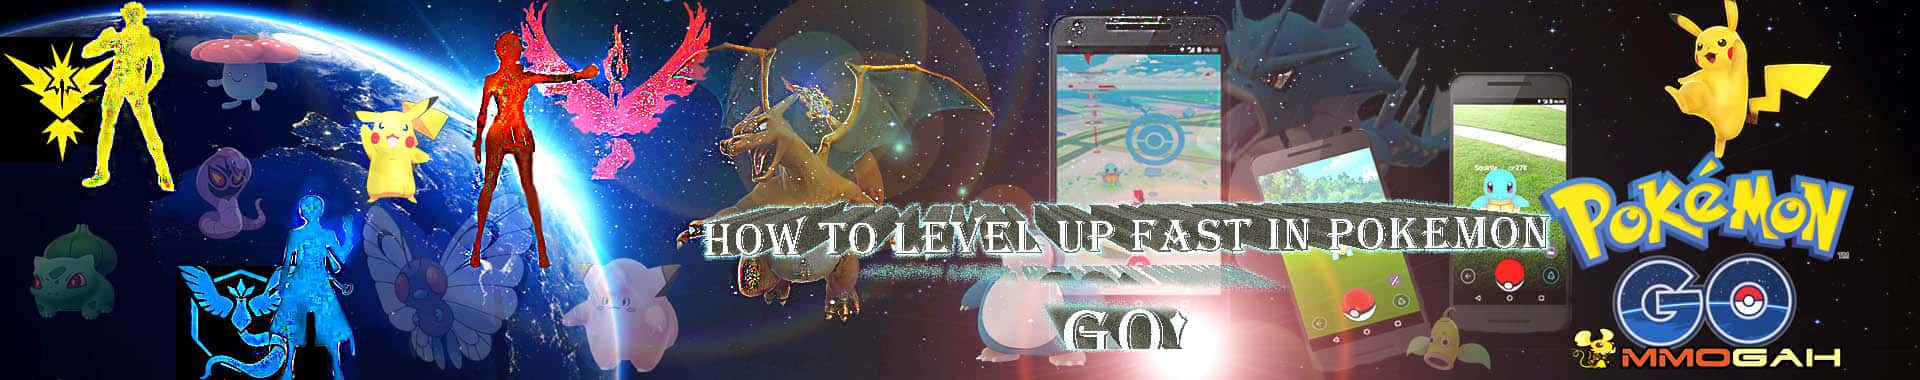 How to Level Up Fast in Pokemon Go